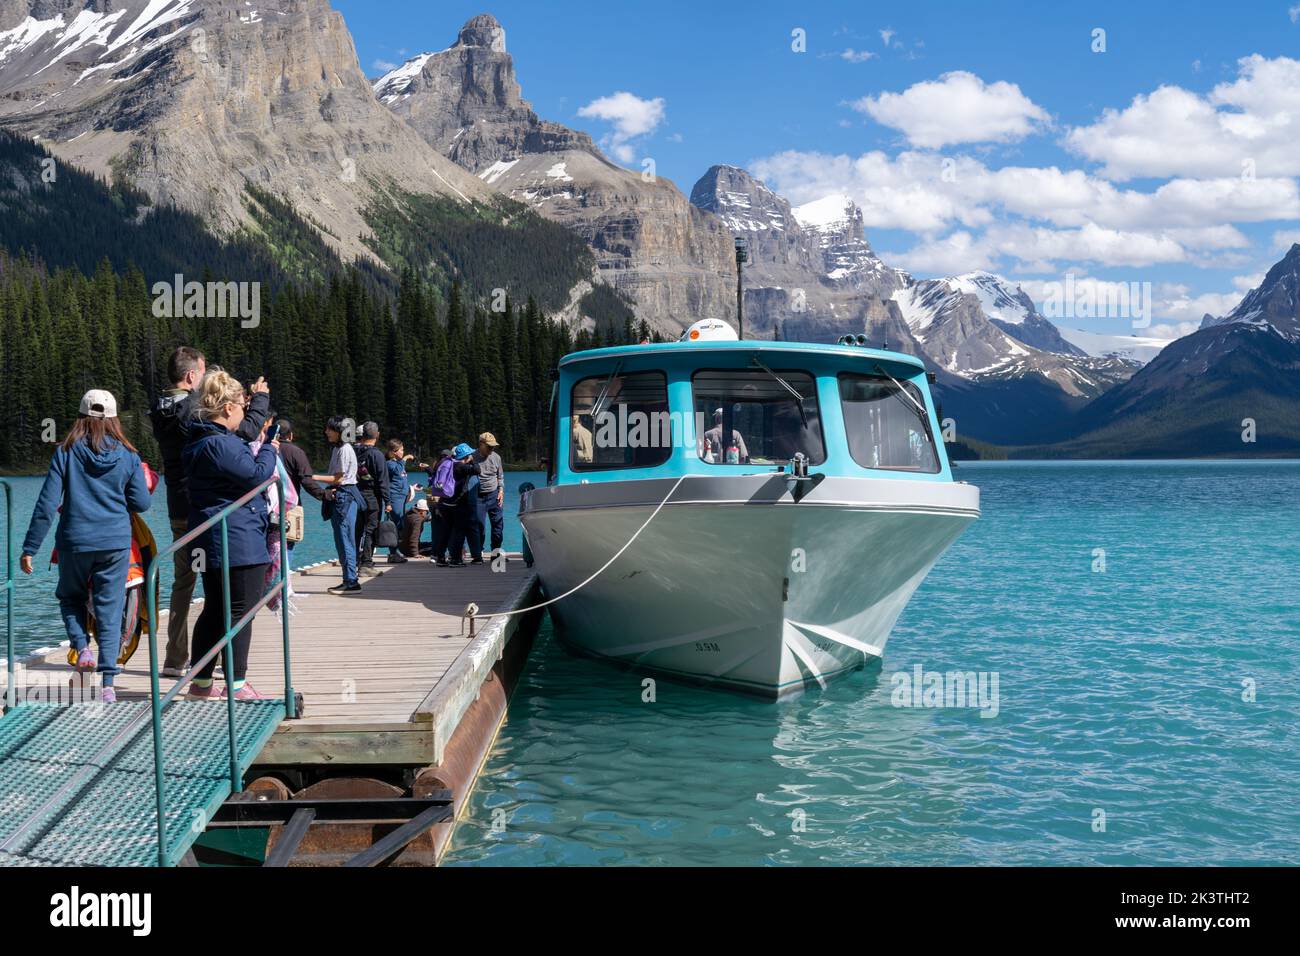 Jasper, Alberta, Canada - July 13, 2022: Tourists line up on the dock to board a boat ride as they depart from Spirit Island on Maligne Lake Stock Photo